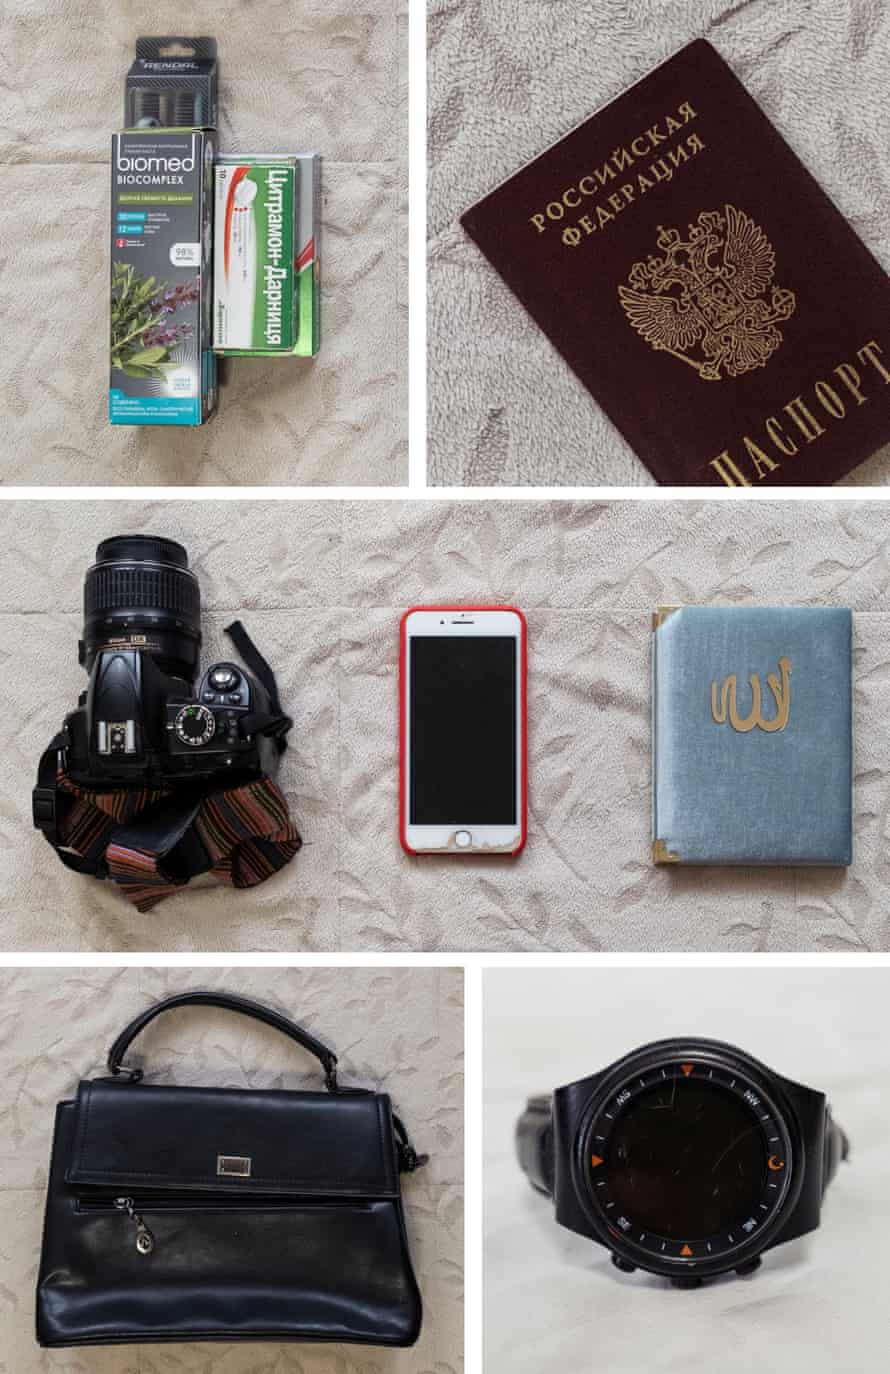 Mumine has two bags packed at all times. One holds her passport, press card and camera; the other has a toothbrush, headache tablets and a copy of the Qur’an.